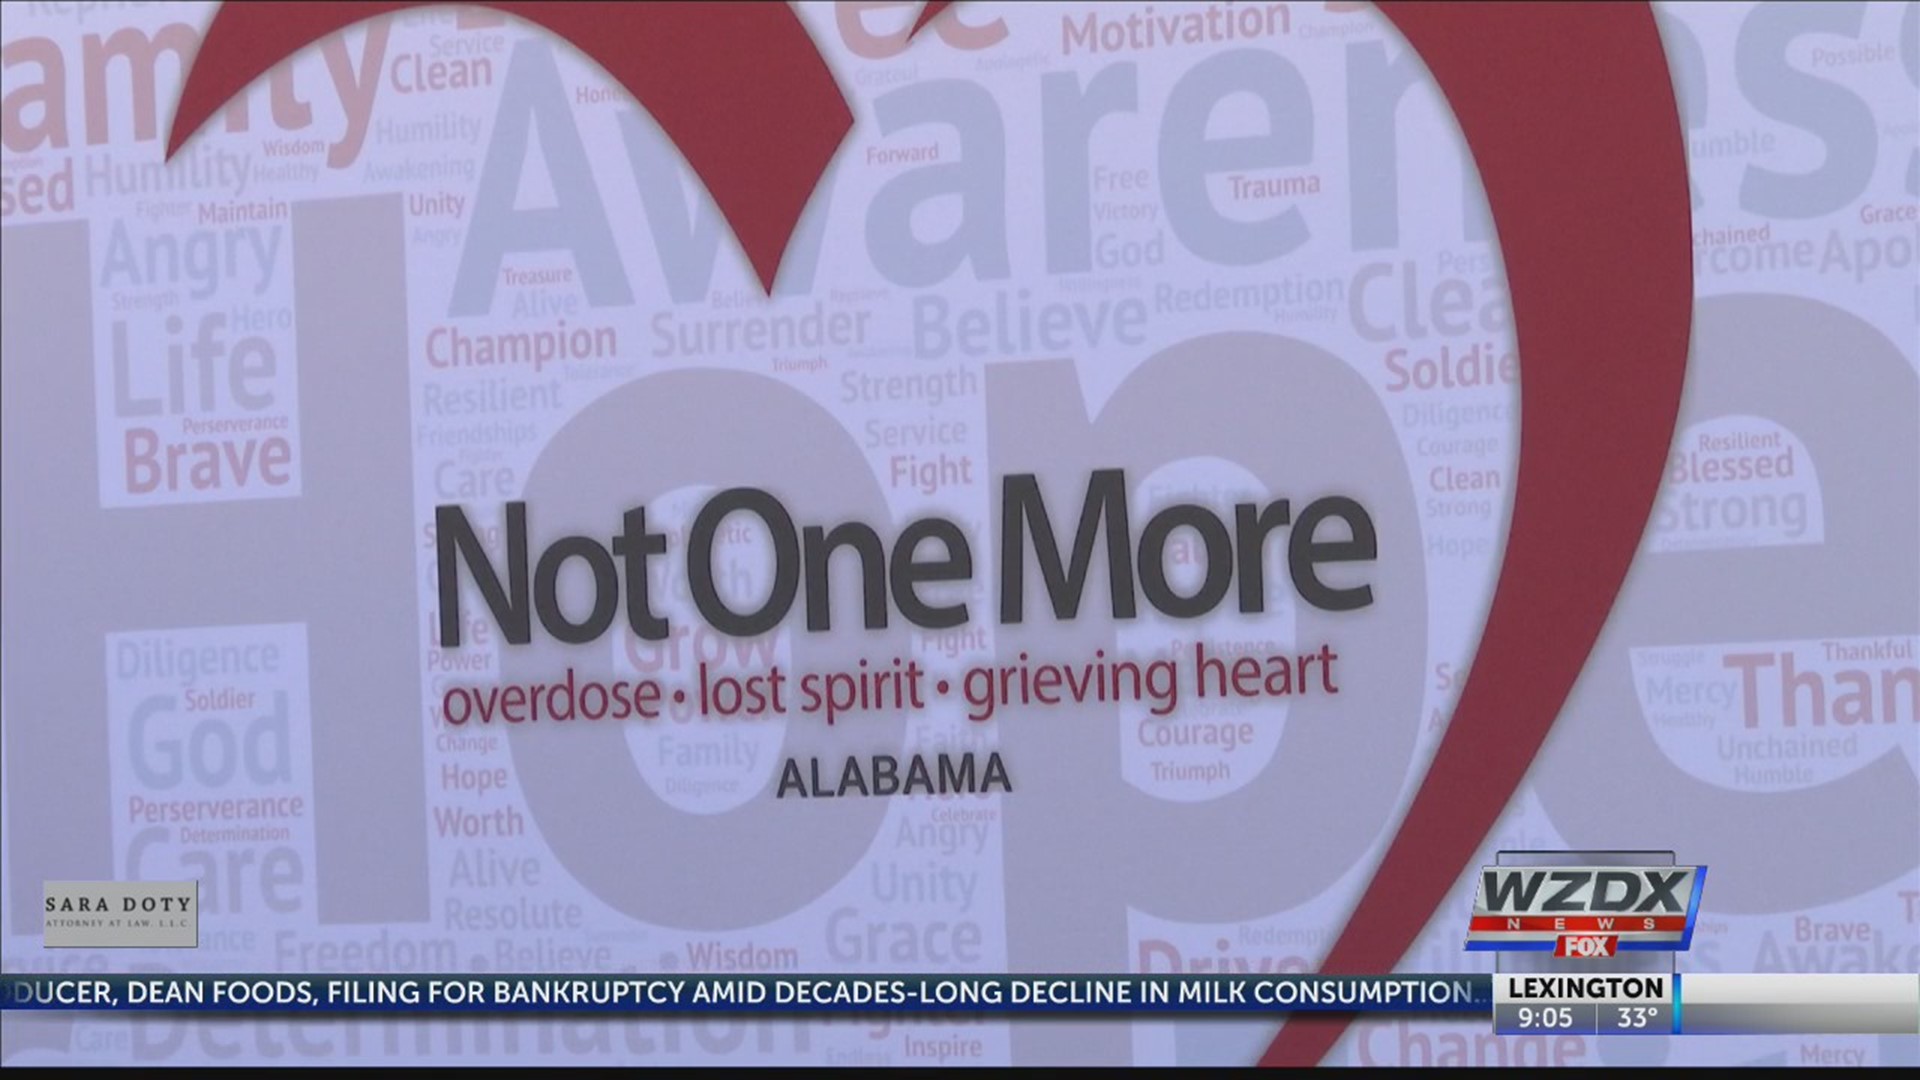 Information about a new way to help families battle addiction comes to Alabama this week.